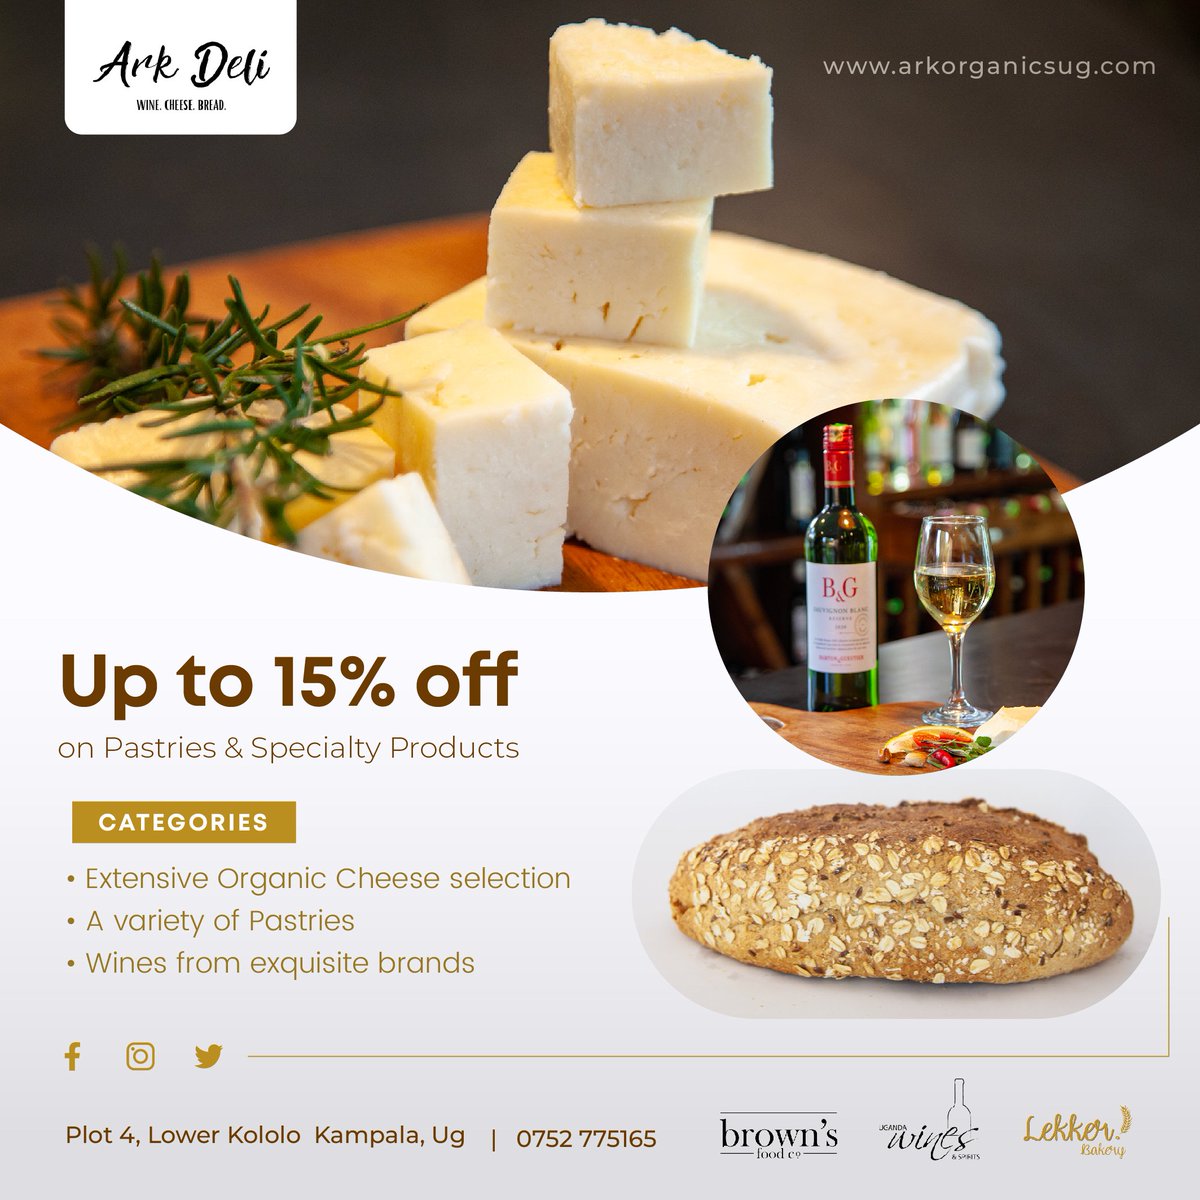 15% discount on your favourites🧀🍷🍥🥐! Harry while offer still lasts.

📍 Plot 4, Lower Kololo | 0752775165.
#arkdeli #discount #offerday #winelover #wineandcheese #pairing #foodie #tasty #cheese #arkorganics